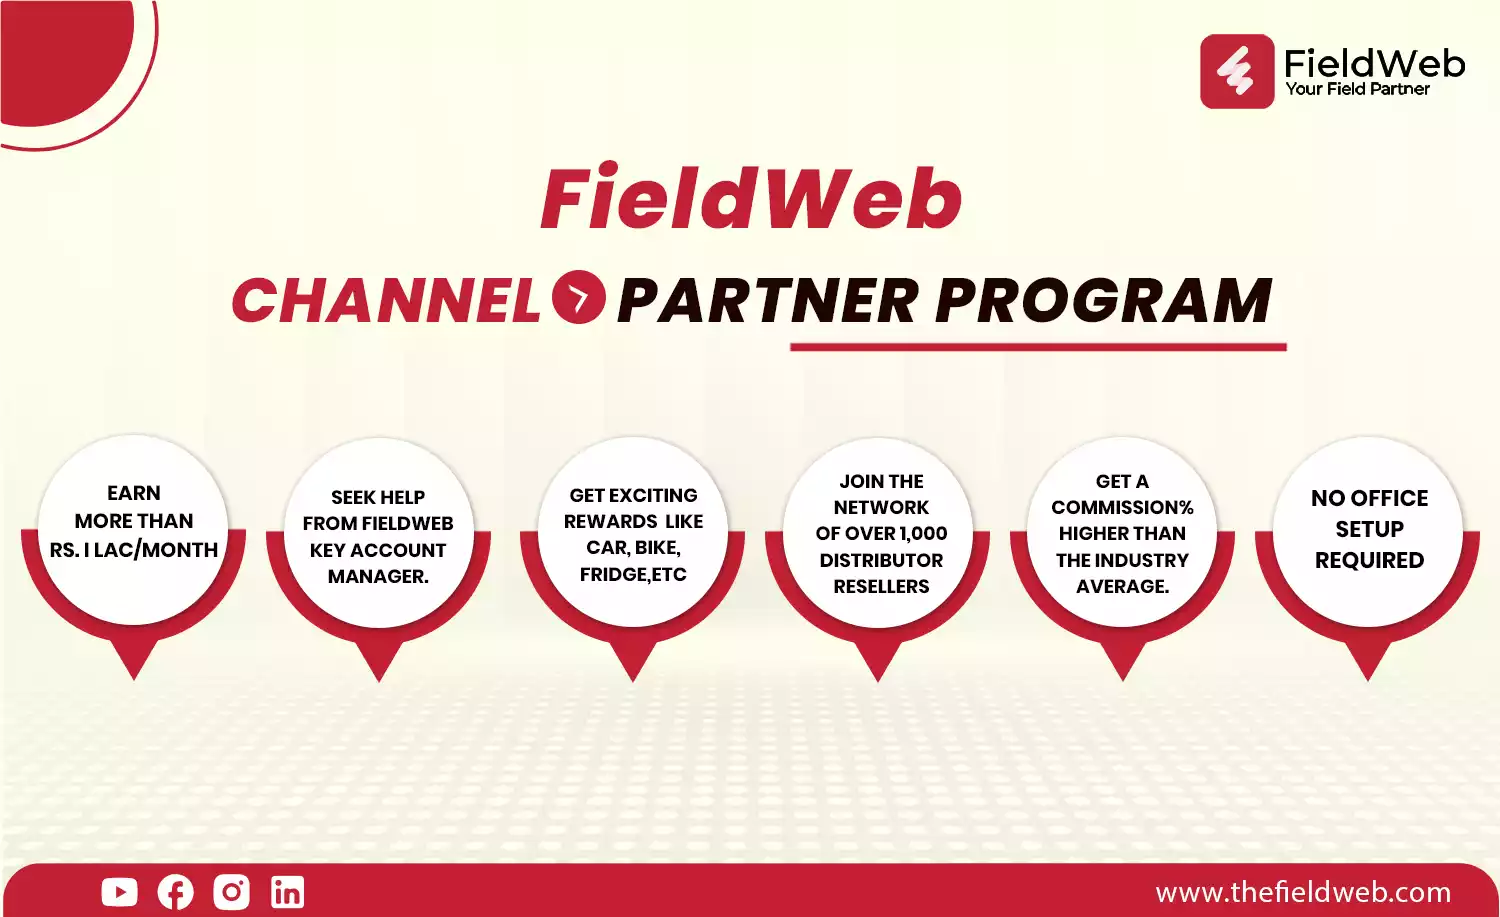 fieldweb channel partner program explaining how a person can make Rs.1 lac/month without having a proper office setup and can gain software commissions more than the market standard